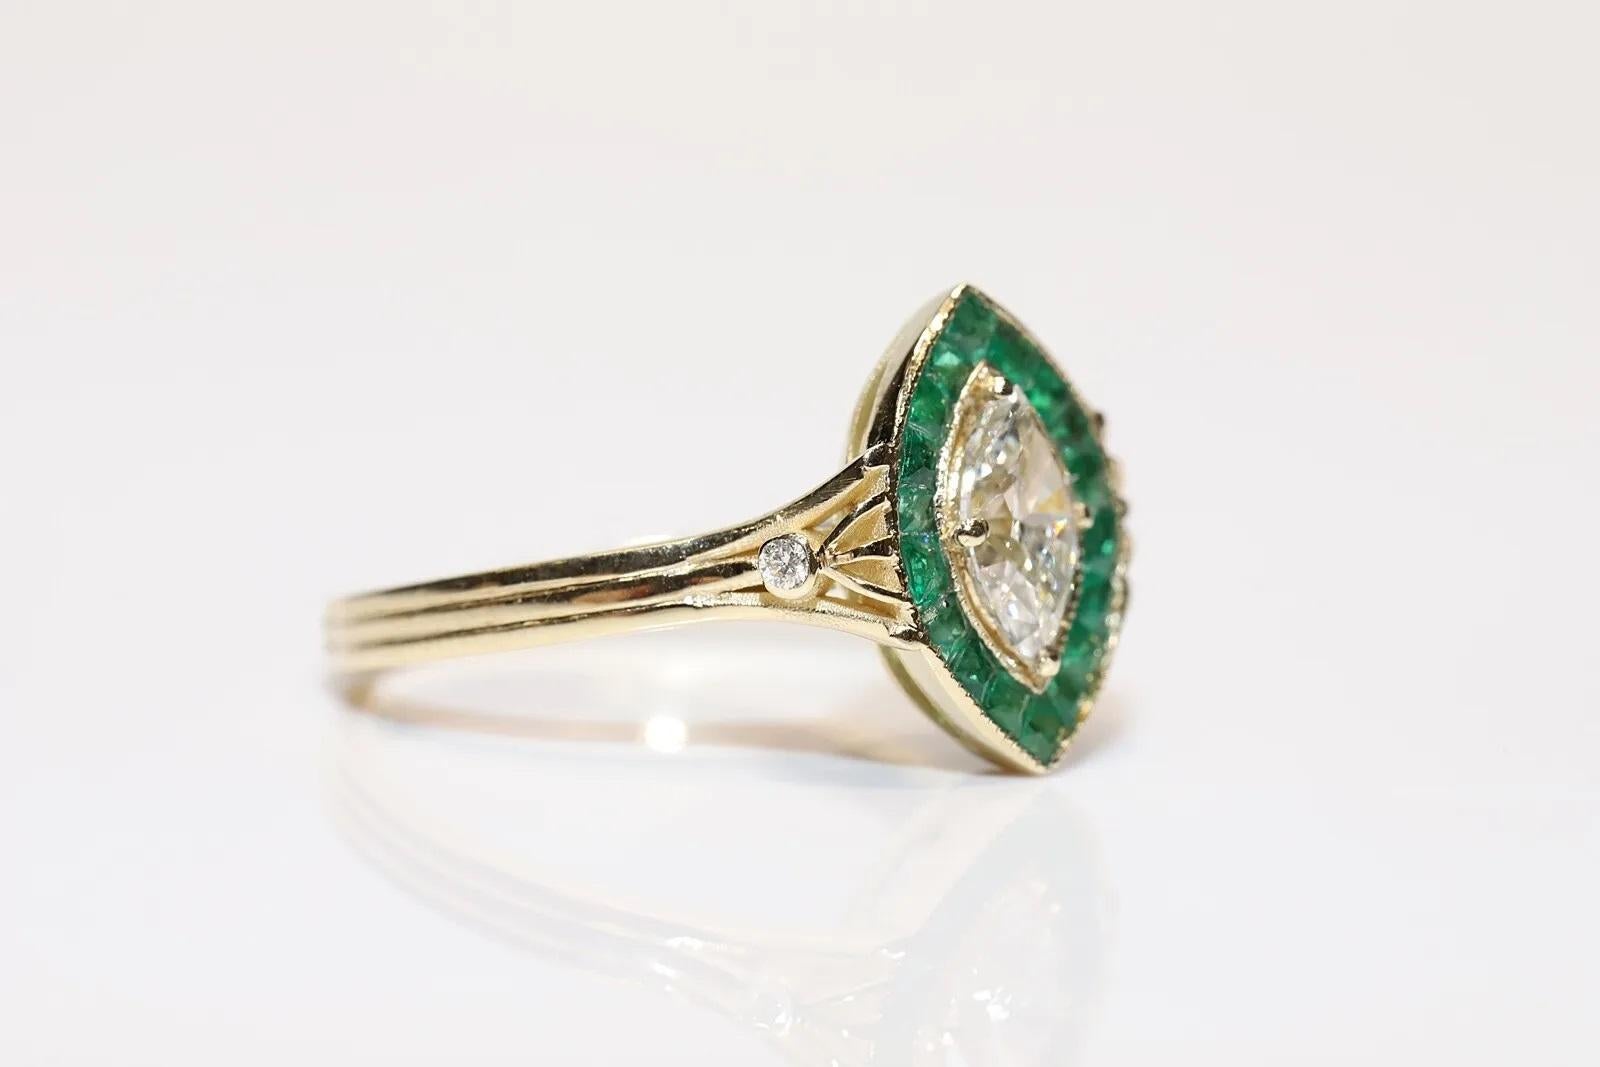 New Made 14k Gold Natural Marquise Cut Diamond And Caliber Emerald Ring In New Condition For Sale In Fatih/İstanbul, 34